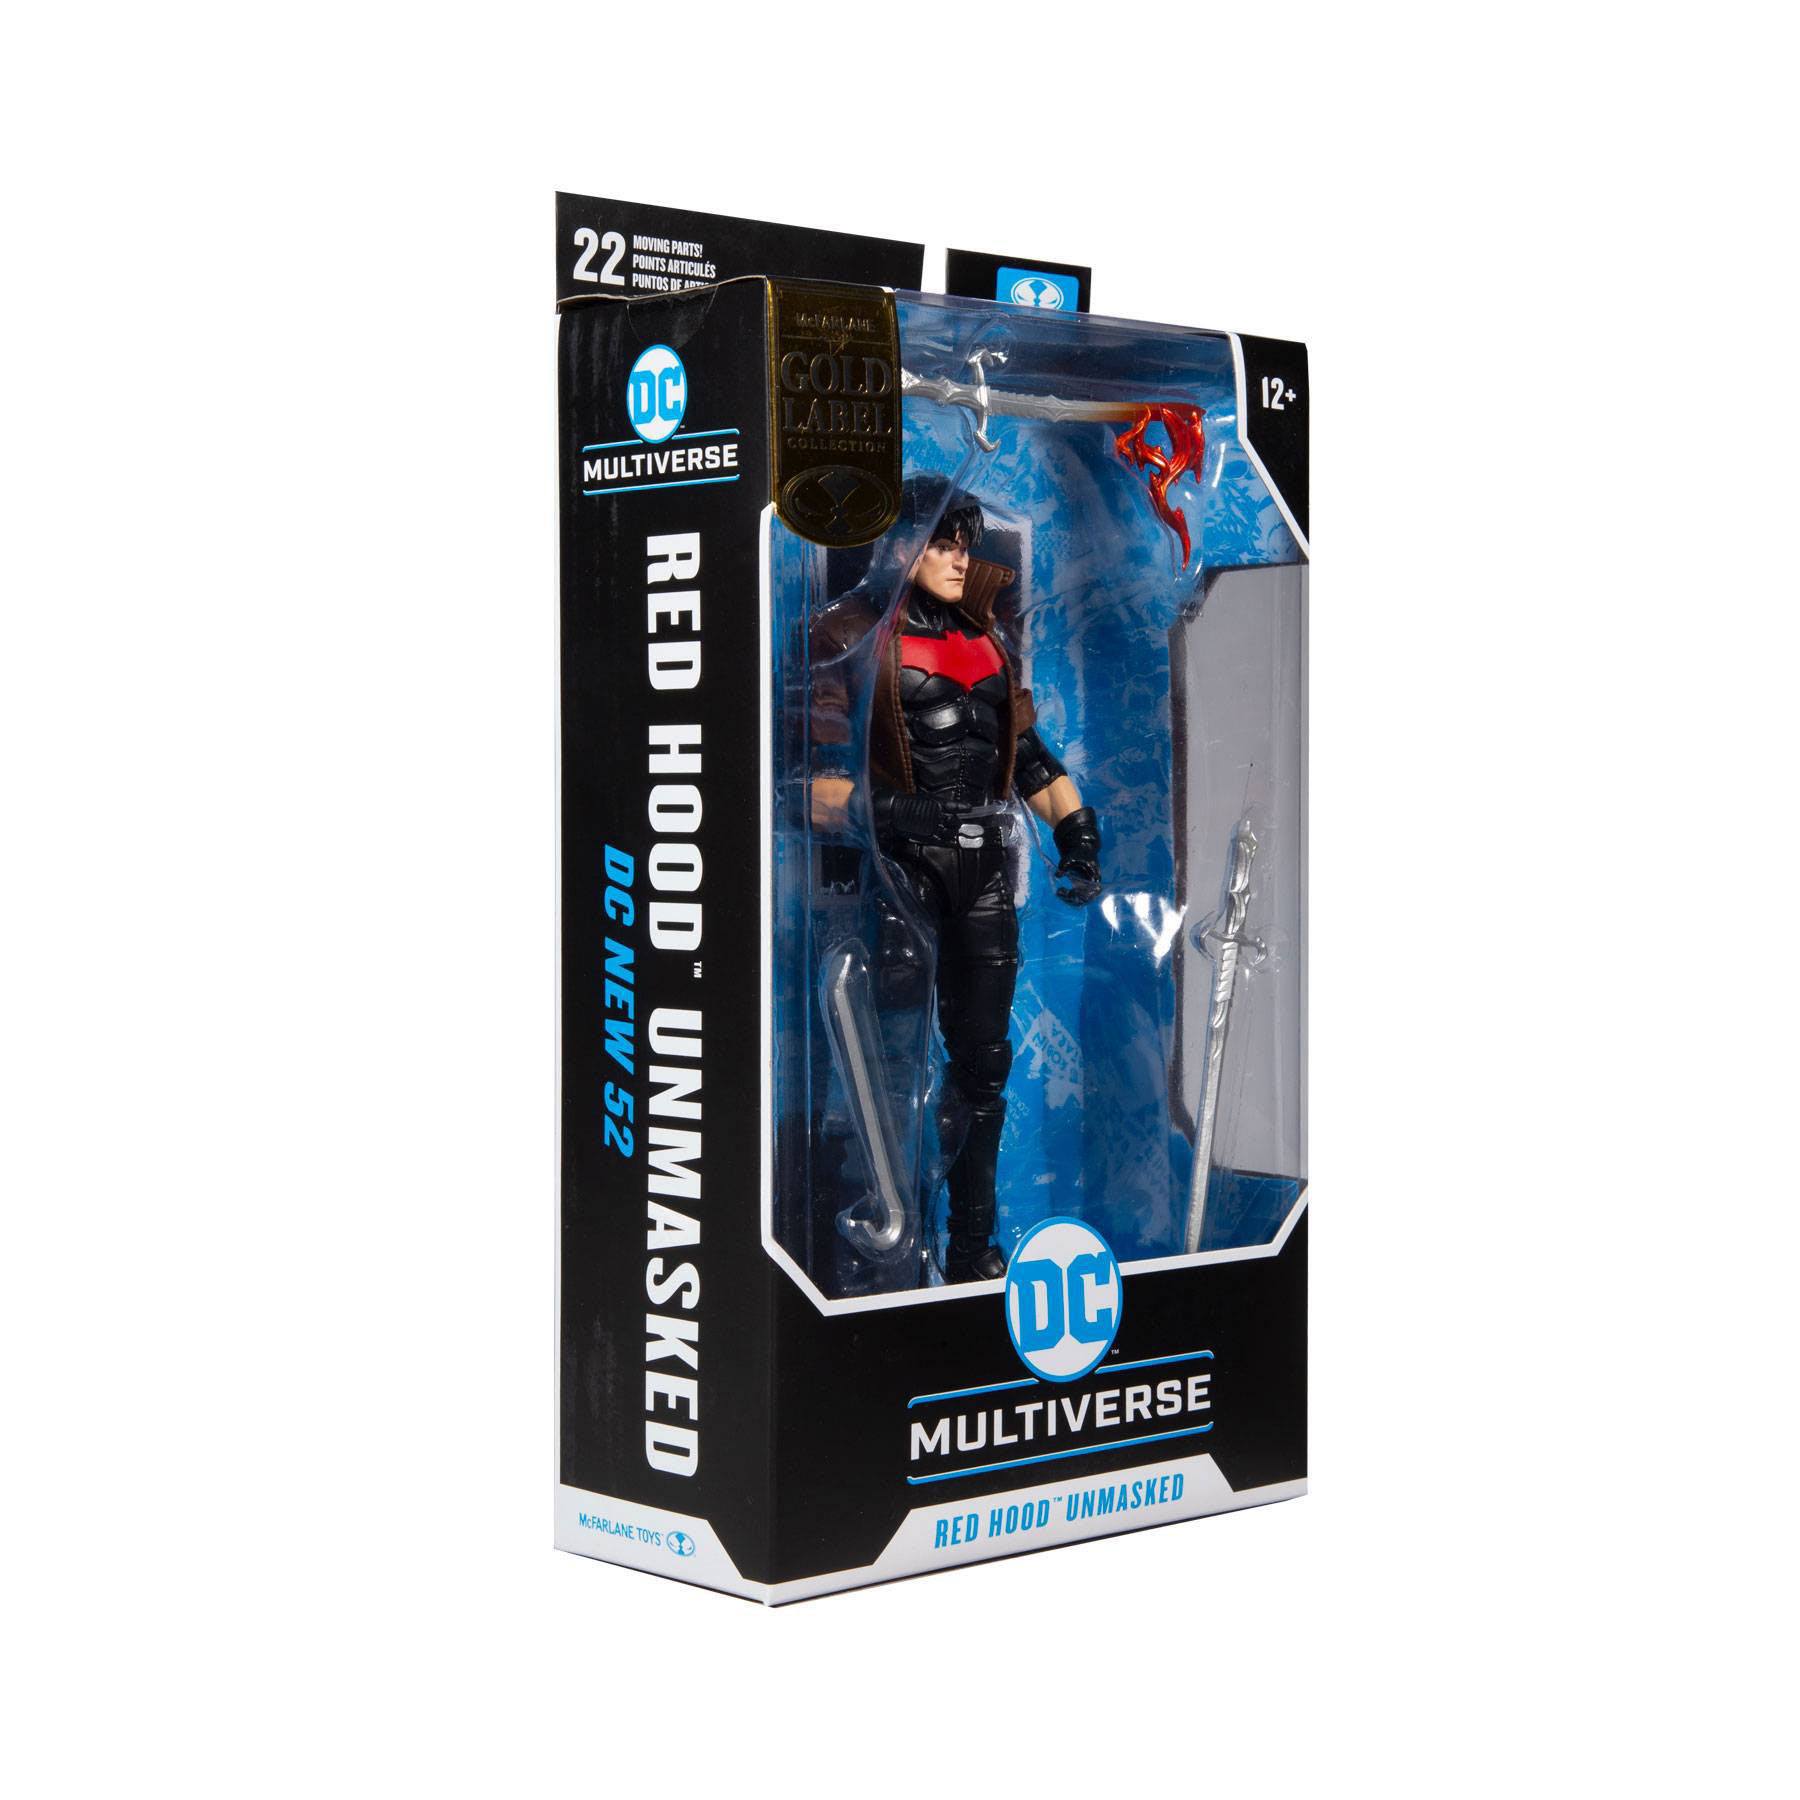 The New 52 DC Multiverse Actionfigur Red Hood Unmasked (Gold Label) 18 cm MCF15170 787926151701